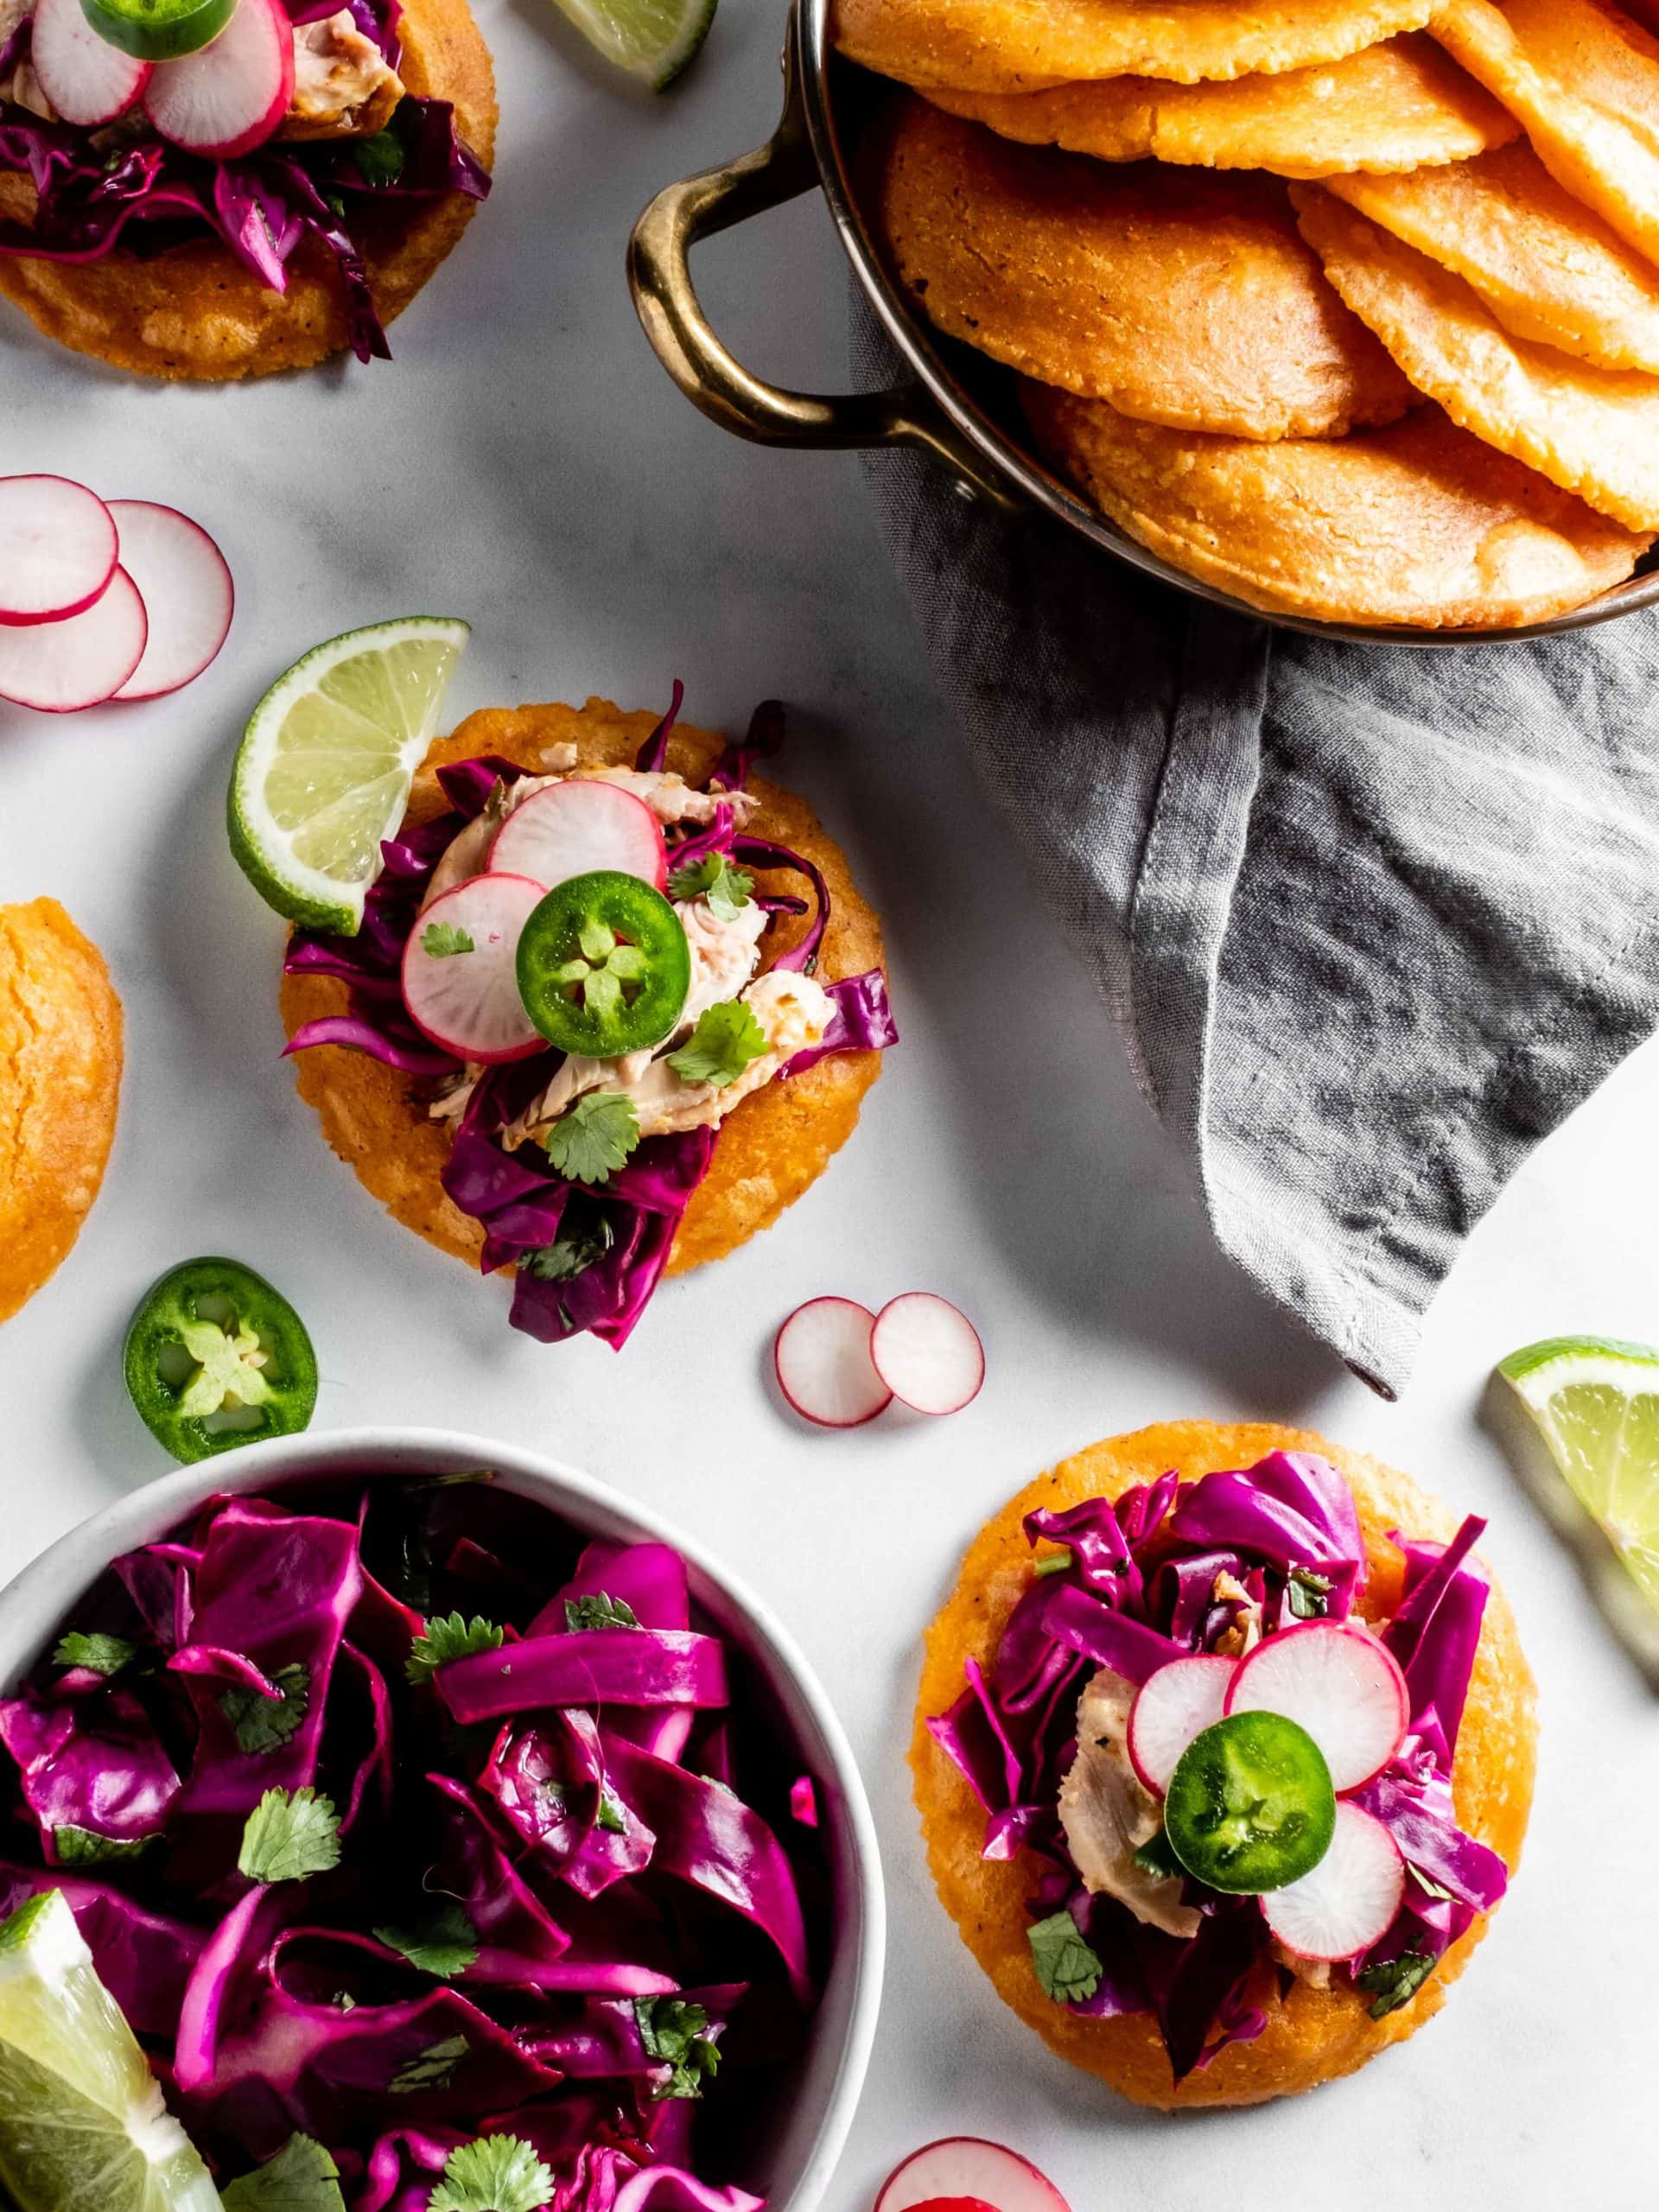 salbutes with stew chicken and red cabbage